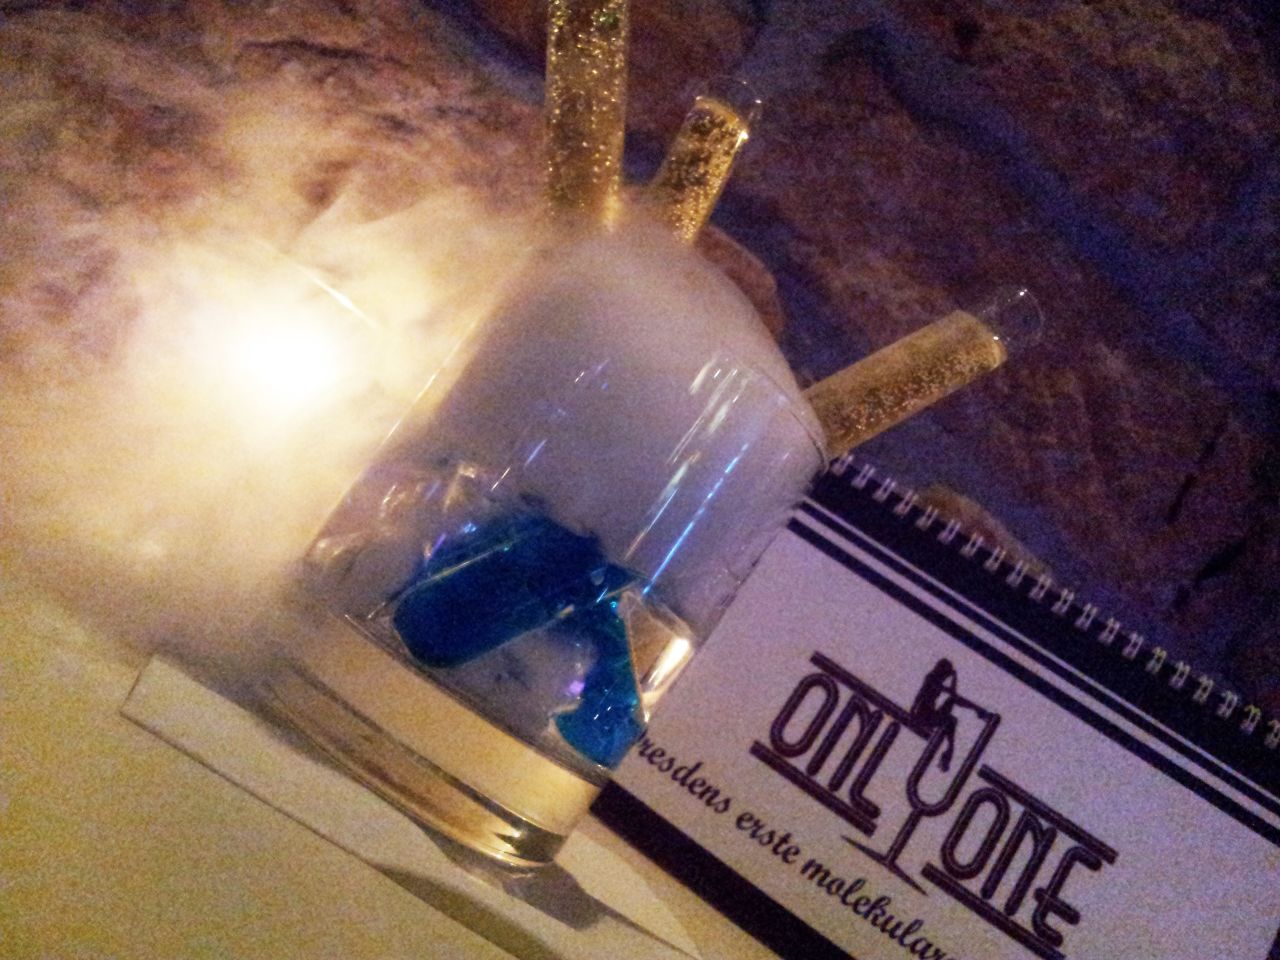 OnlyOne's experimental, triple-test-tube cocktail. Is this a bar or a science lab?